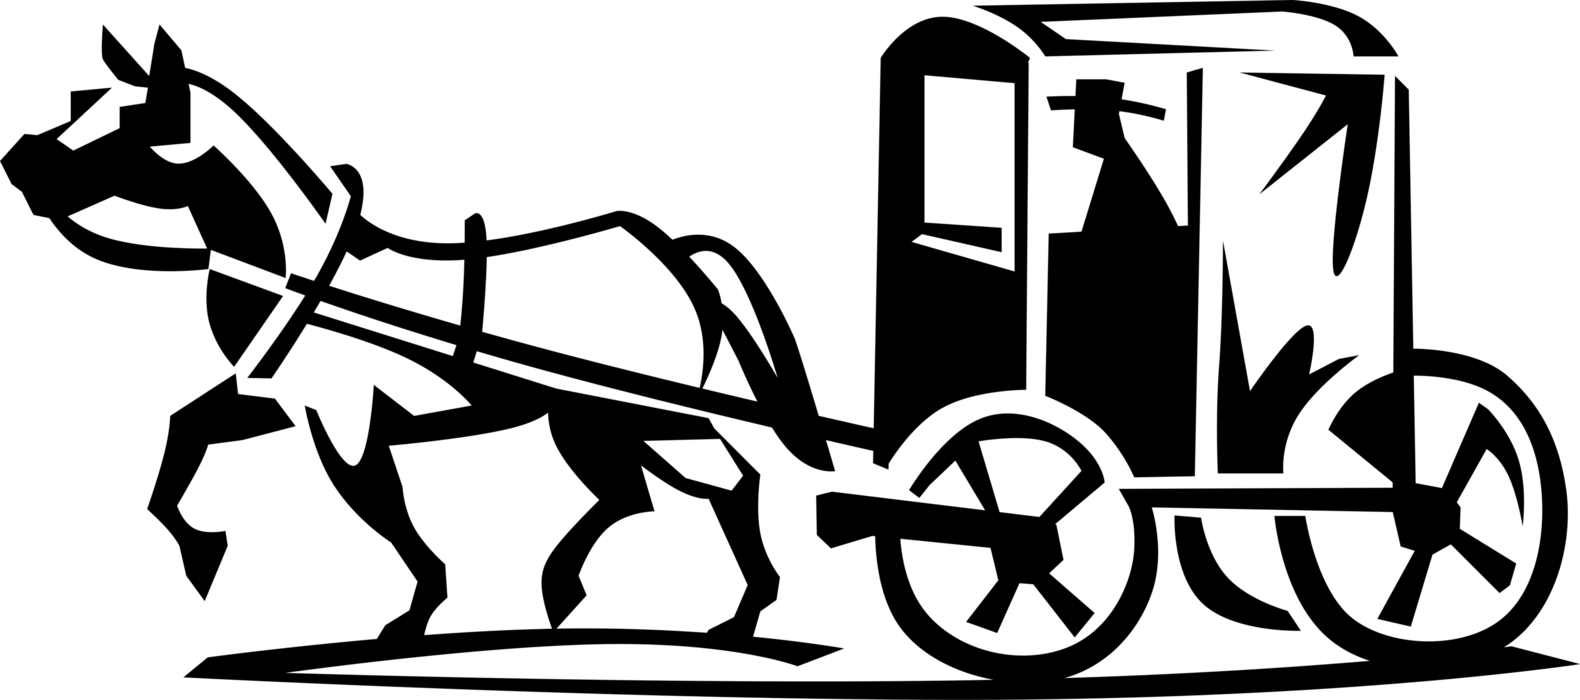 Vector Illustration of Amish Pennsylvania Dutch Horse Drawn Carriage Horse and Buggy